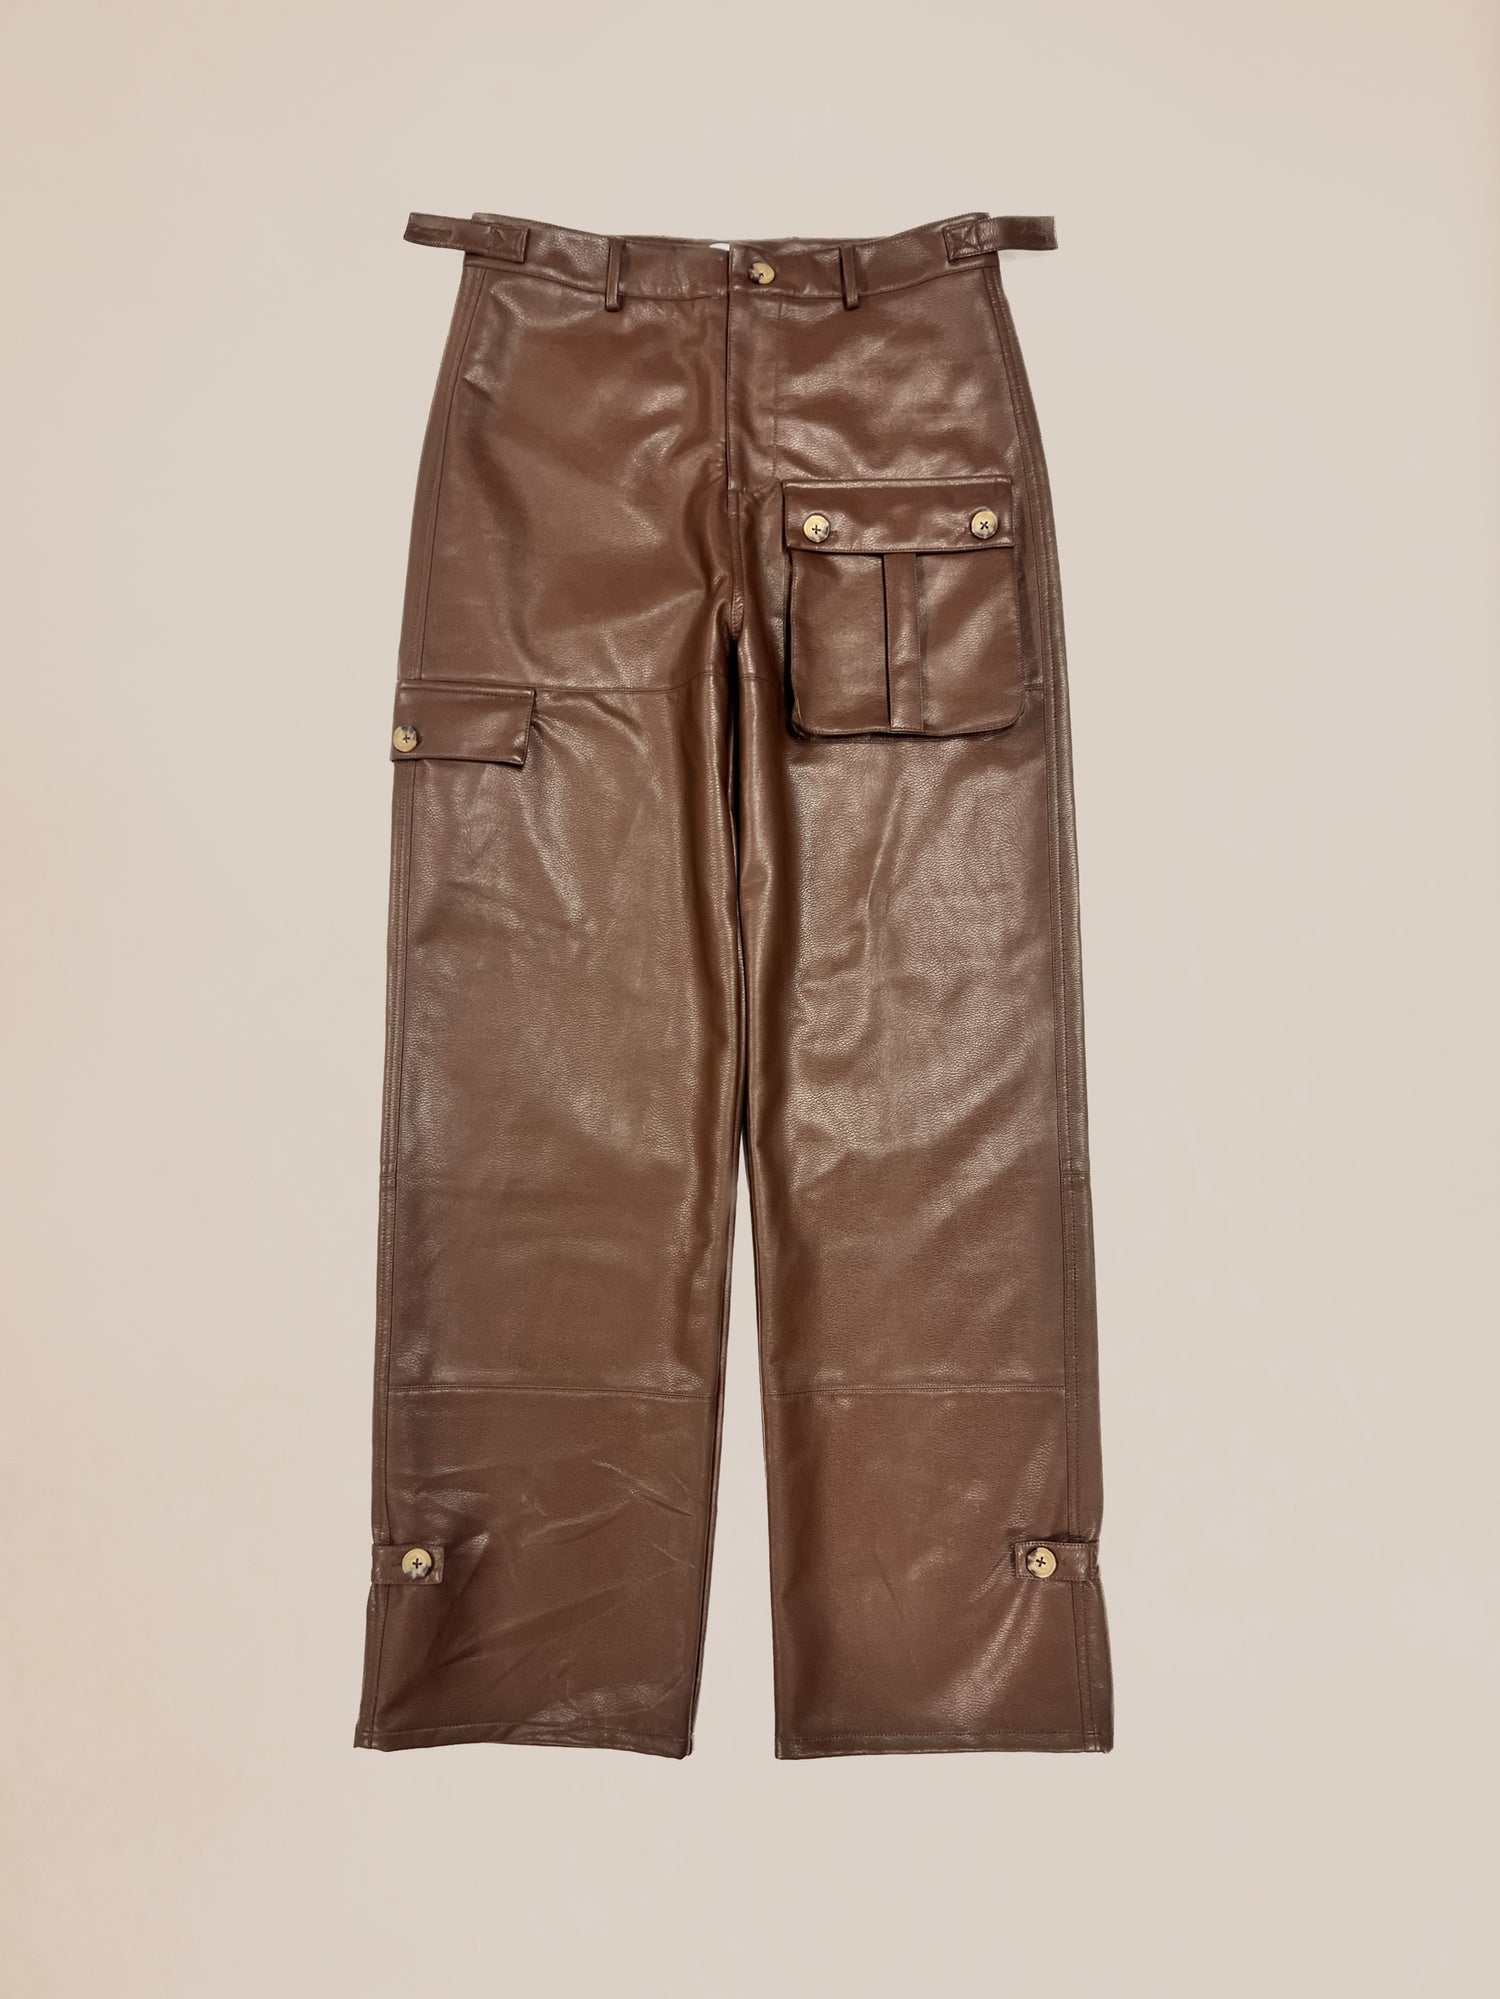 Profound Sample 29 faux leather cargo pants with front pockets and button closures.